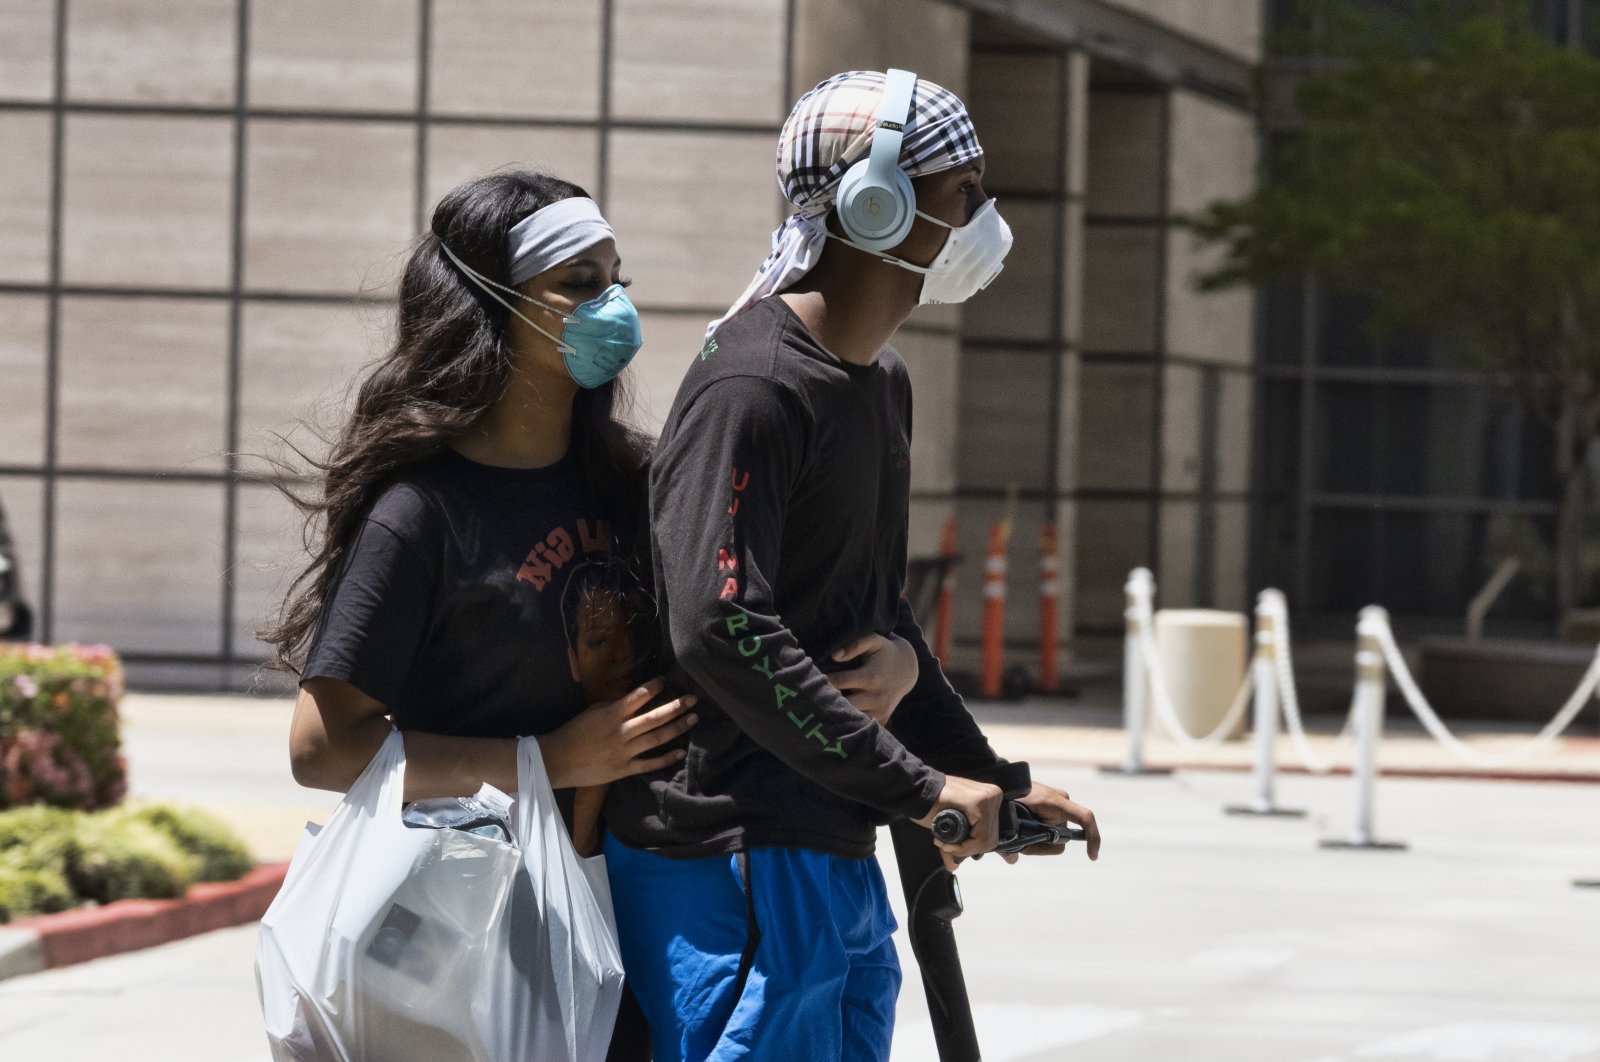 A couple wearing protective masks from the coronavirus ride a scooter down the street past the Ronald Reagan UCLA Medical Center in the Westwood section of Los Angeles, California, U.S. on May 15, 2020. (AP Photo)